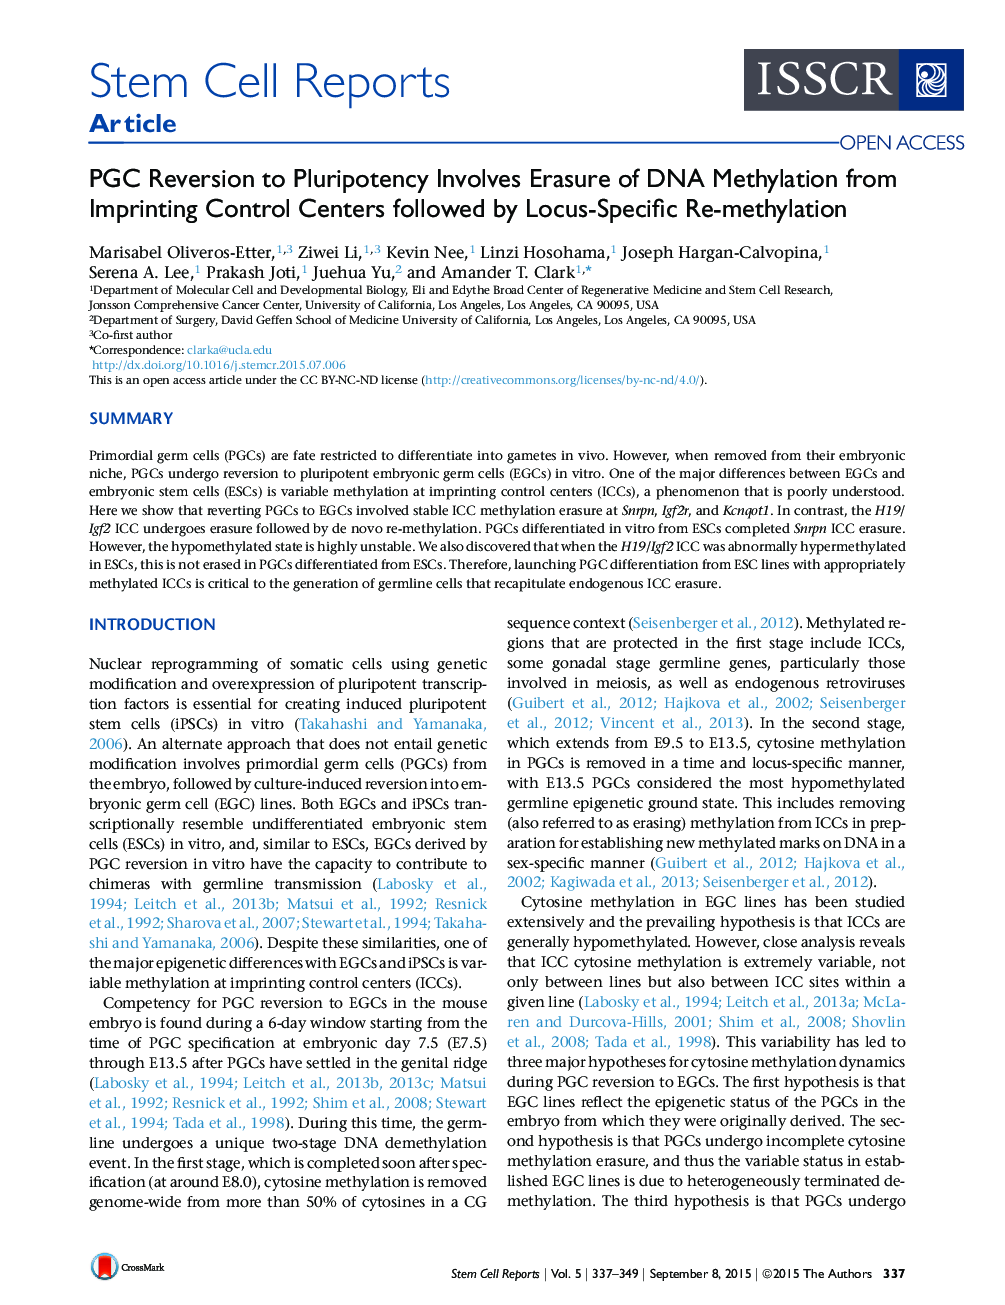 PGC Reversion to Pluripotency Involves Erasure of DNA Methylation from Imprinting Control Centers followed by Locus-Specific Re-methylation 